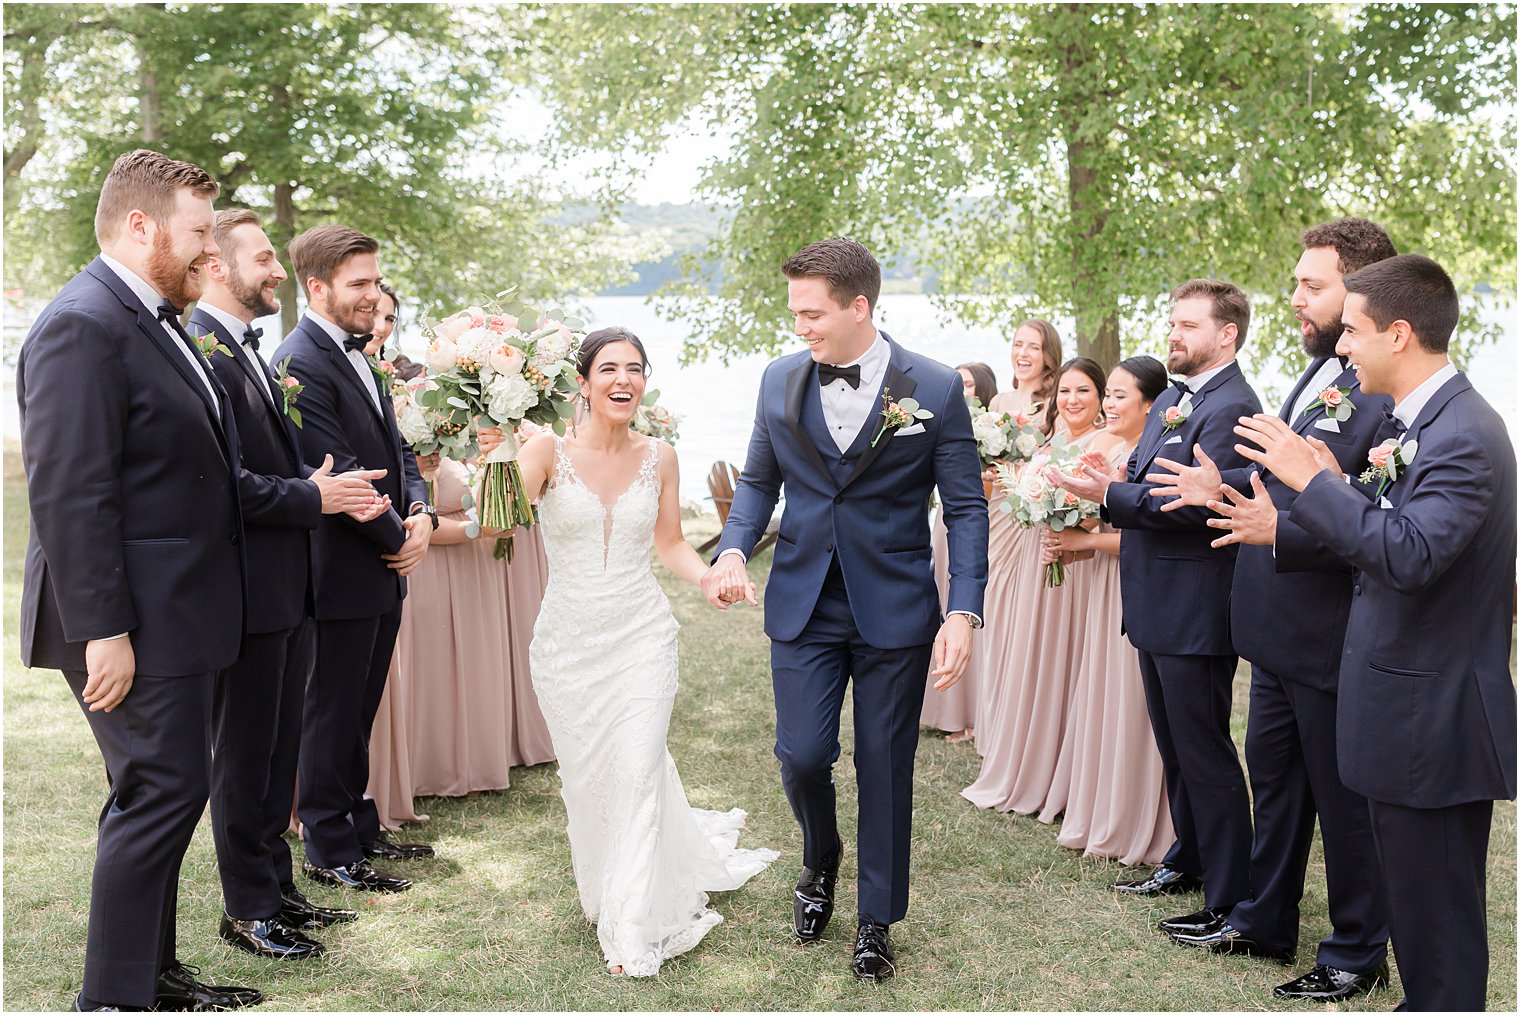 newlyweds hold hands walking through wedding party